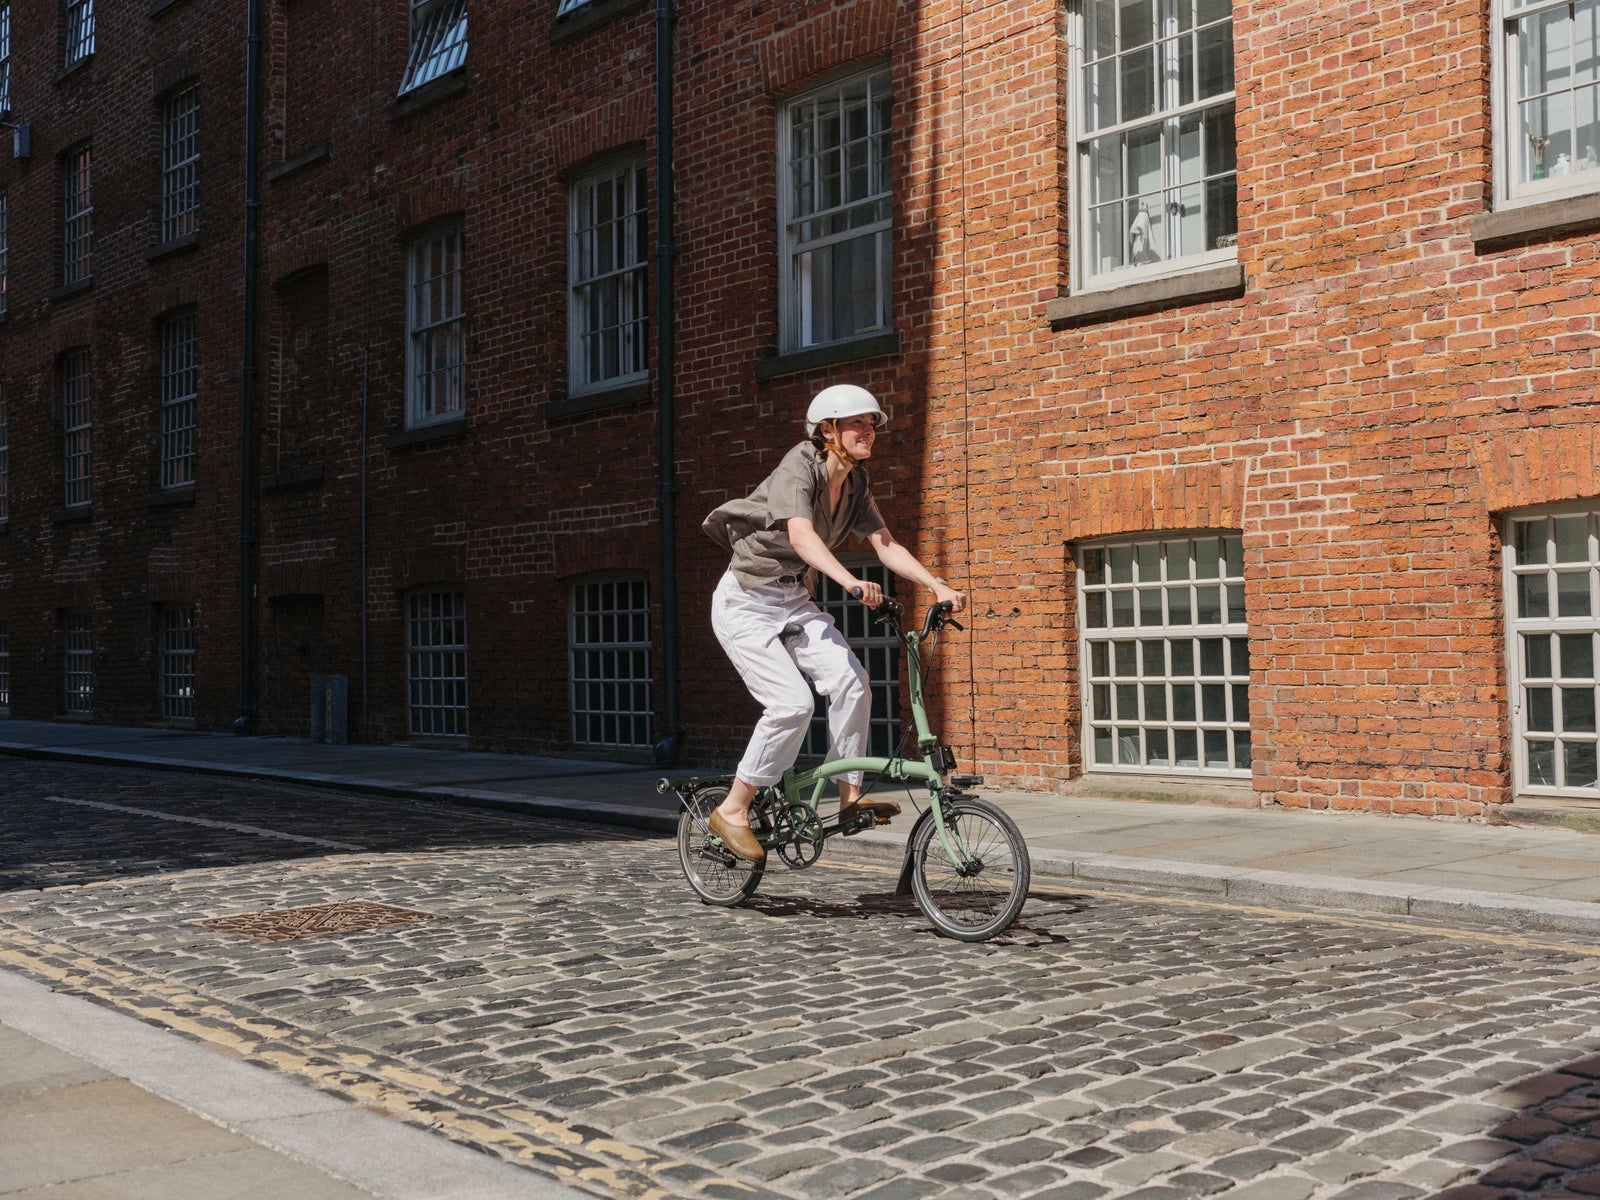 Become a Brompton dealer